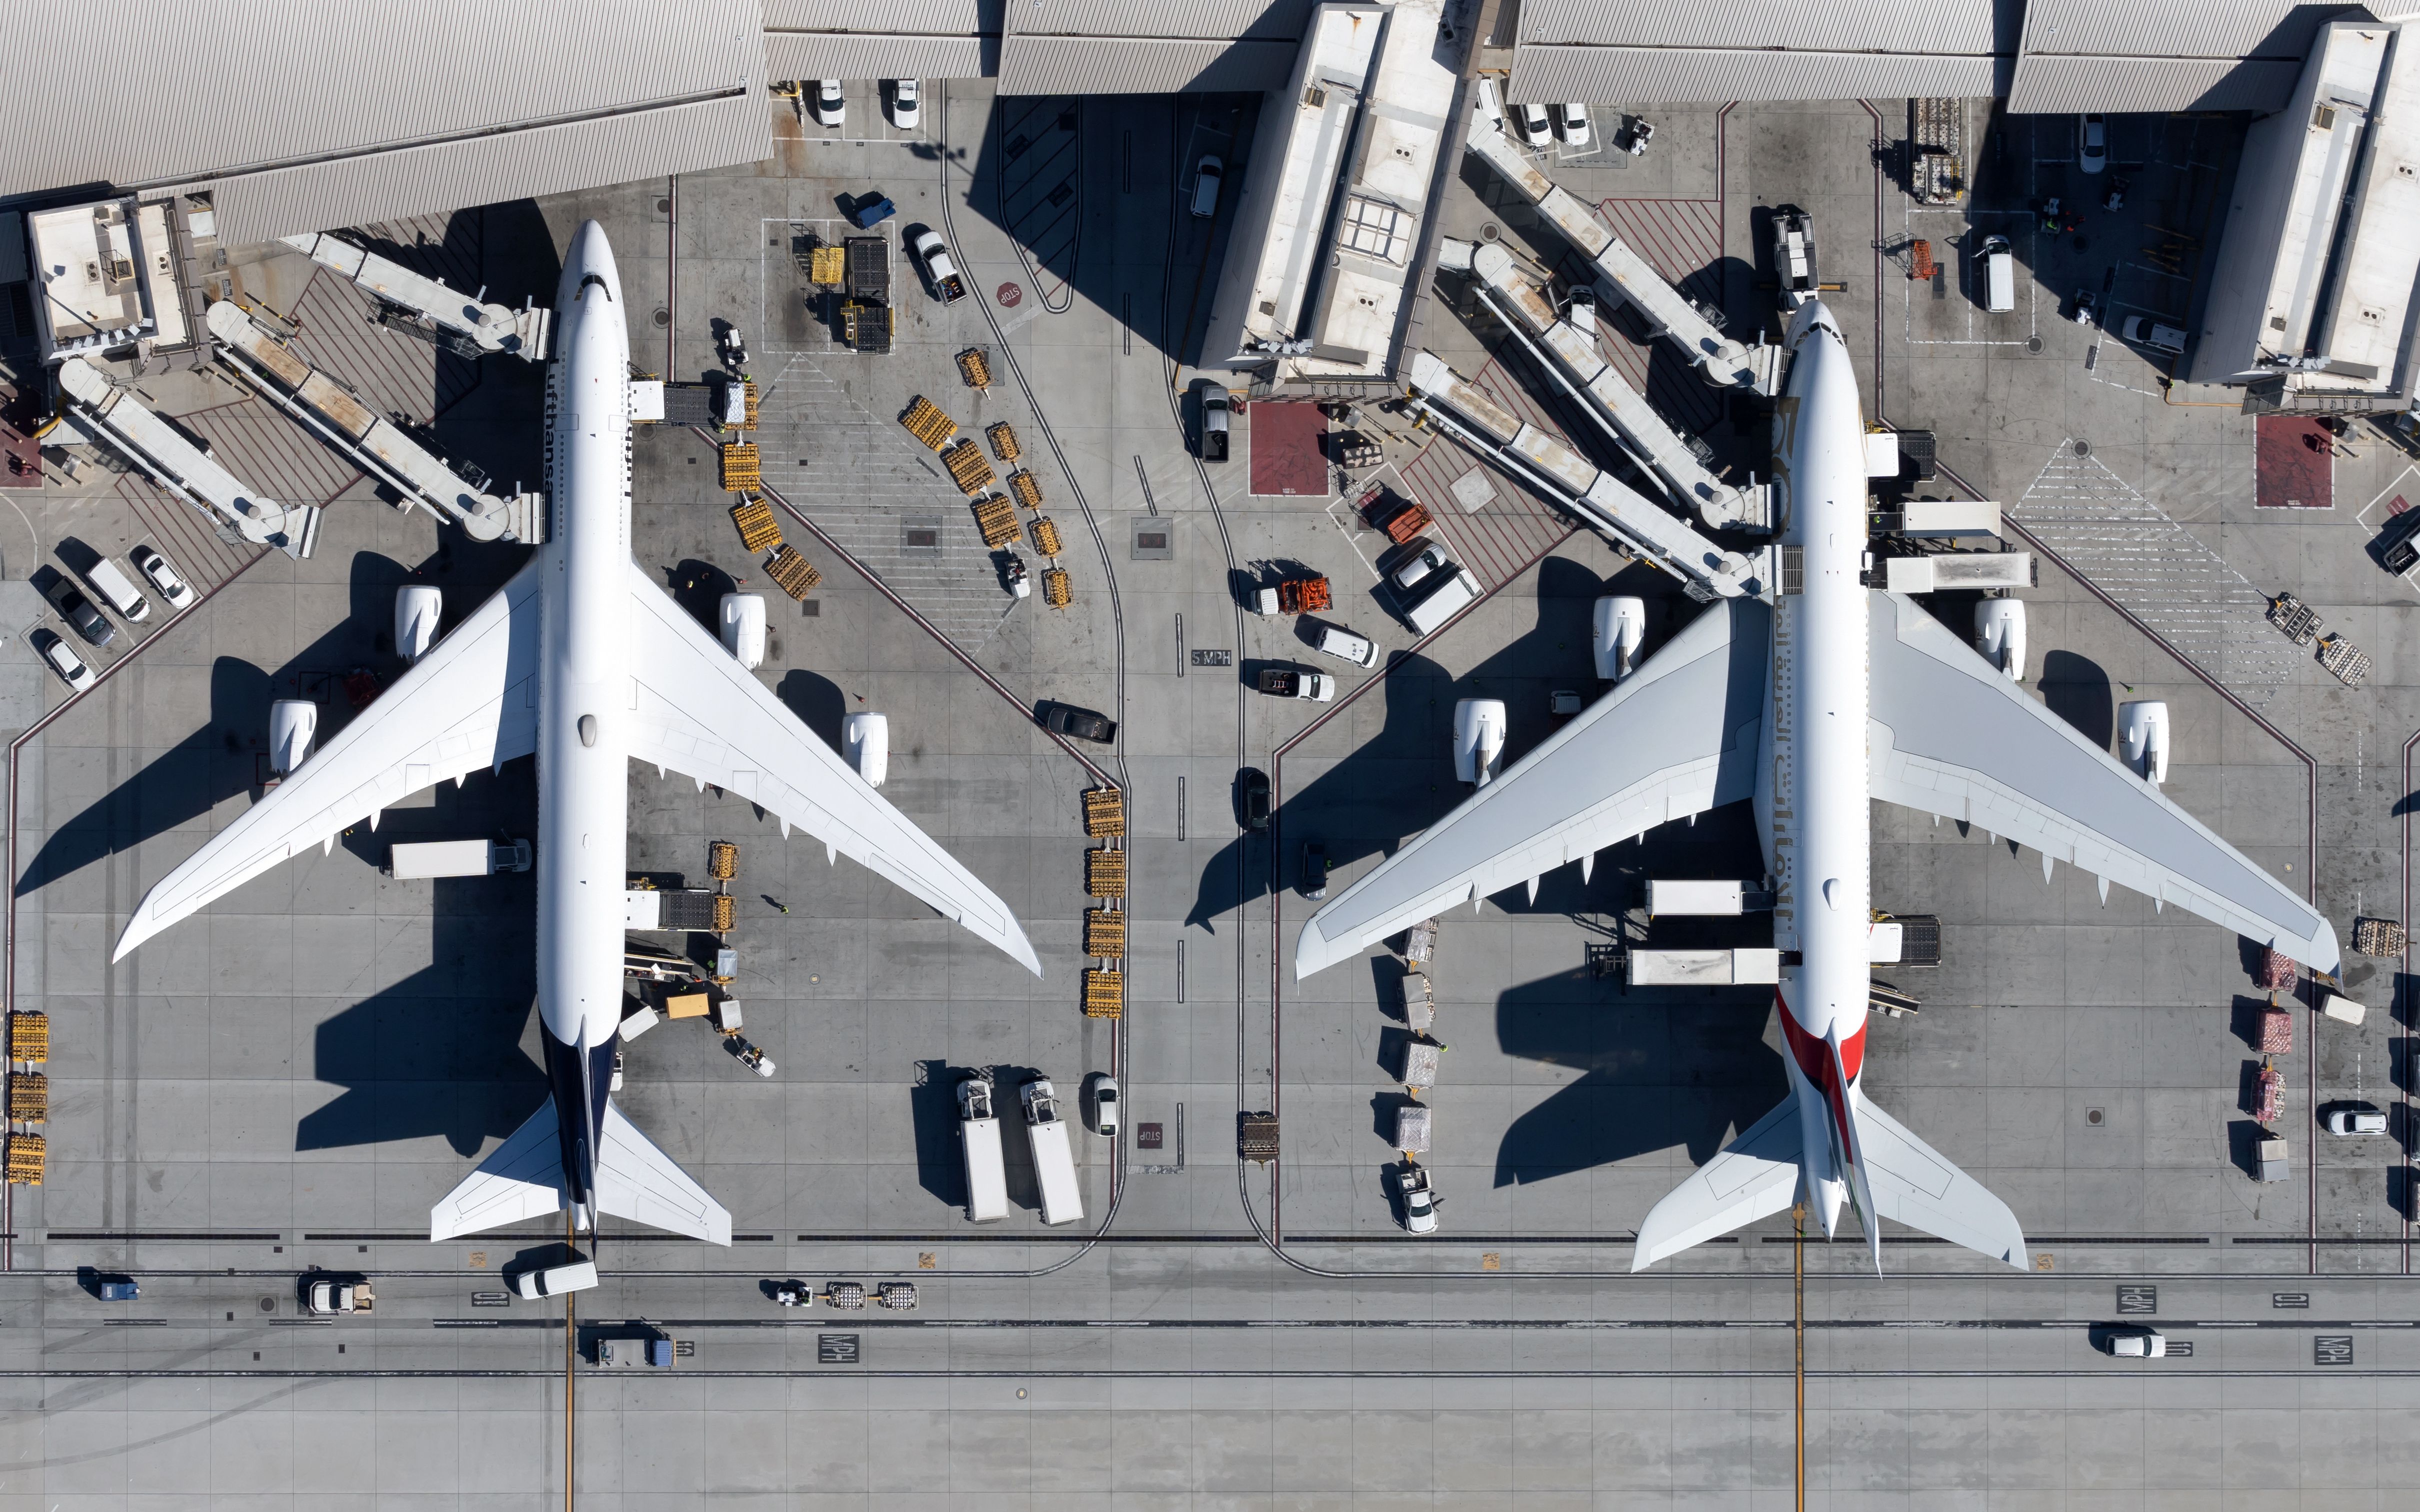 An overhead view of multiple widebody aircraft at gates at LAX airport.